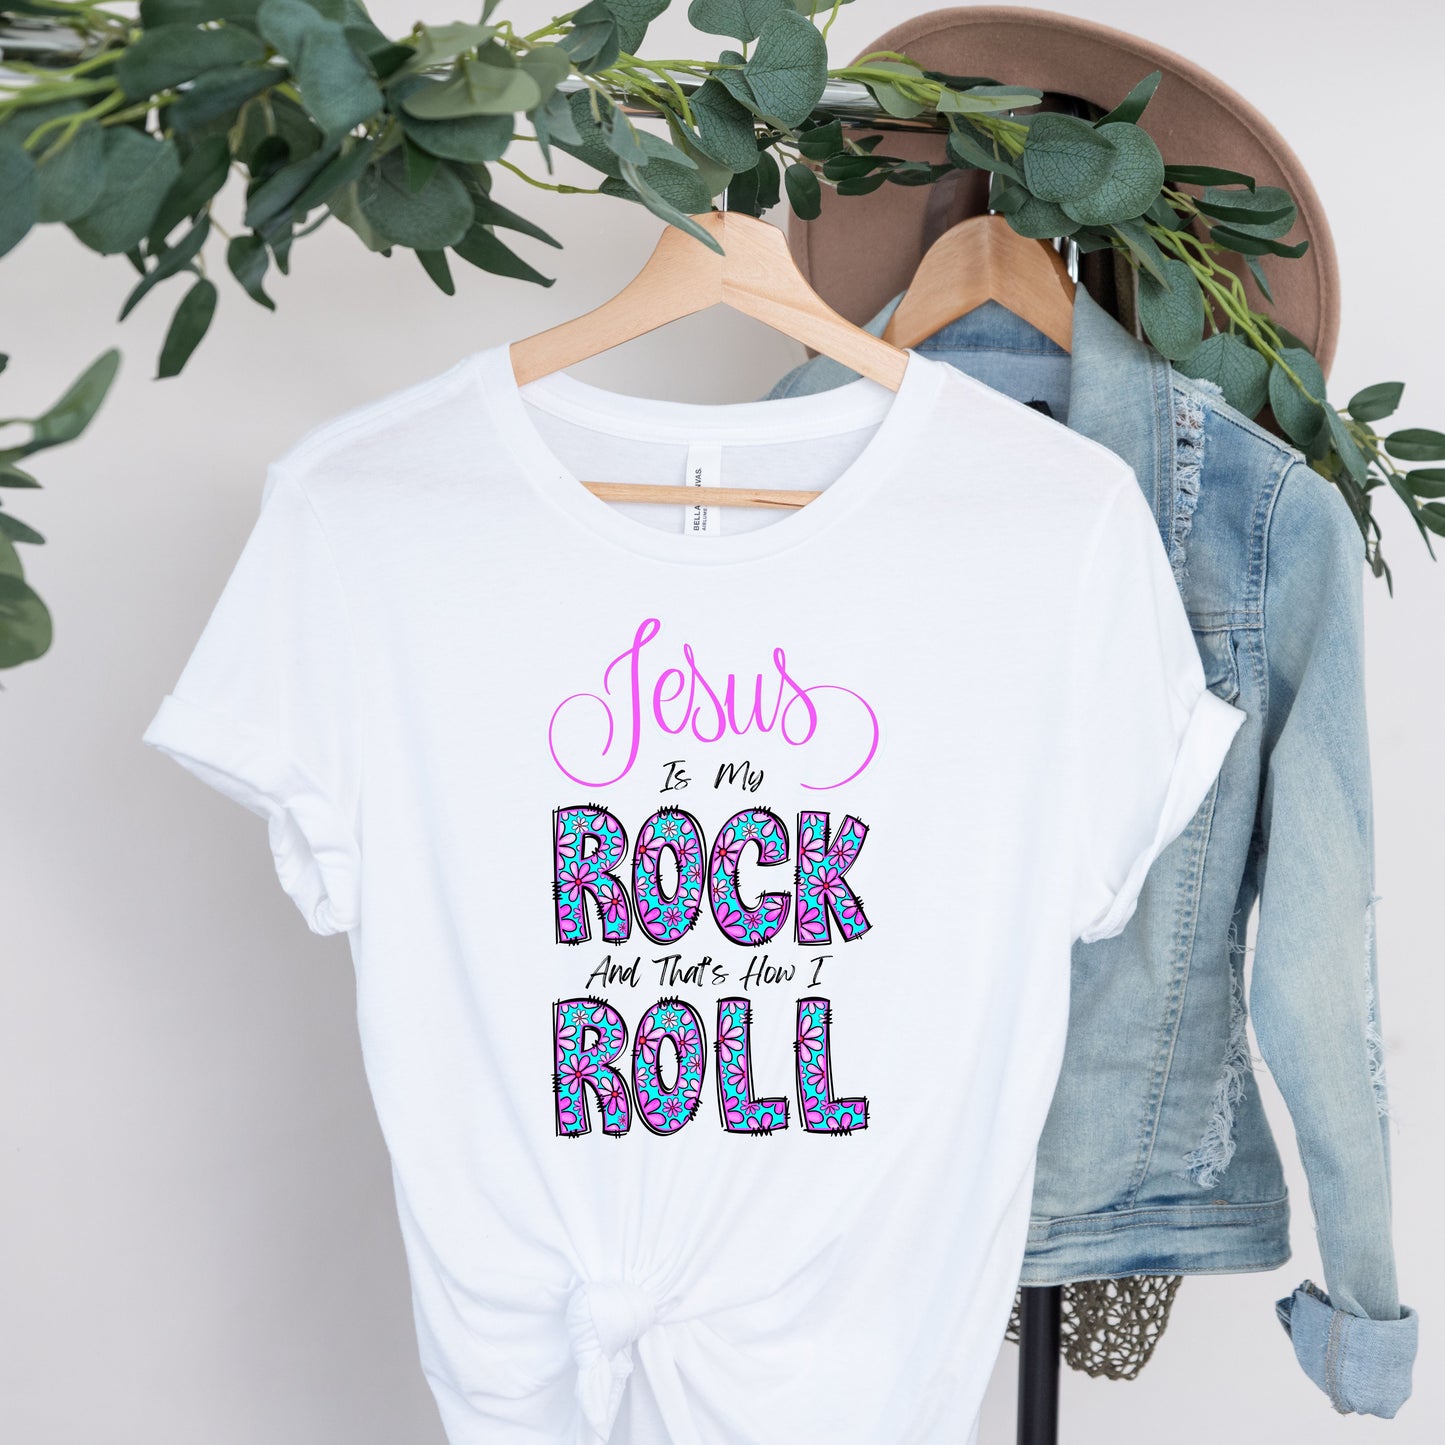 Jesus Is My Rock and Thats How I Roll Short Sleeve Tee, Inspirational T-Shirt, Jesus T-Shirt, Christian T-Shirt, Religious T-Shirt